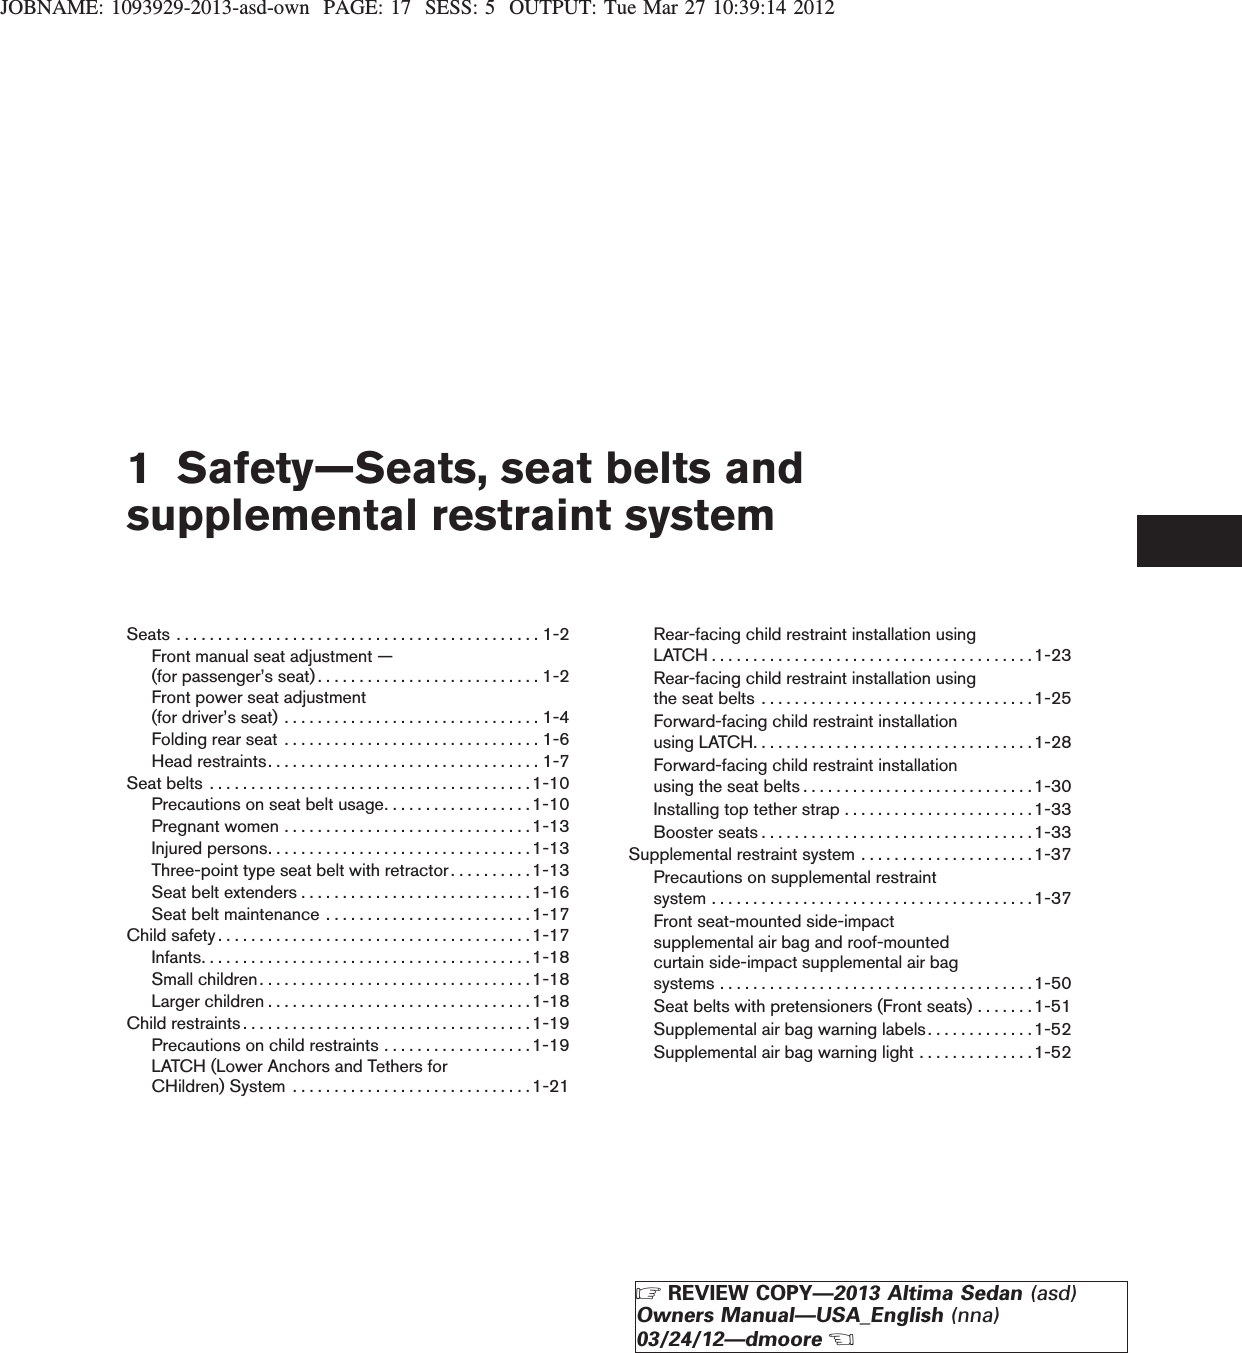 JOBNAME: 1093929-2013-asd-own PAGE: 17 SESS: 5 OUTPUT: Tue Mar 27 10:39:14 20121 Safety—Seats, seat belts andsupplemental restraint systemSeats............................................1-2Front manual seat adjustment —(forpassenger’sseat)...........................1-2Front power seat adjustment(fordriver’sseat) ...............................1-4Foldingrearseat ...............................1-6Headrestraints.................................1-7Seatbelts .......................................1-10Precautions on seat belt usage. . . . . . . . . . . . . . . . . .1-10Pregnantwomen..............................1-13Injuredpersons................................1-13Three-point type seat belt with retractor . . . . . . . . . .1-13Seatbeltextenders............................1-16Seat belt maintenance . . . . . . . . . . . . . . . . . . . . . . . . .1-17Childsafety......................................1-17Infants........................................1-18Smallchildren.................................1-18Largerchildren................................1-18Childrestraints...................................1-19Precautions on child restraints . . . . . . . . . . . . . . . . . .1-19LATCH (Lower Anchors and Tethers forCHildren)System .............................1-21Rear-facing child restraint installation usingLATCH.......................................1-23Rear-facing child restraint installation usingtheseatbelts .................................1-25Forward-facing child restraint installationusingLATCH..................................1-28Forward-facing child restraint installationusingtheseatbelts............................1-30Installing top tether strap . . . . . . . . . . . . . . . . . . . . . . .1-33Boosterseats.................................1-33Supplemental restraint system . . . . . . . . . . . . . . . . . . . . .1-37Precautions on supplemental restraintsystem.......................................1-37Front seat-mounted side-impactsupplemental air bag and roof-mountedcurtain side-impact supplemental air bagsystems......................................1-50Seat belts with pretensioners (Front seats) . . . . . . . 1-51Supplemental air bag warning labels. . . . . . . . . . . . .1-52Supplemental air bag warning light . . . . . . . . . . . . . .1-52ZREVIEW COPY—2013 Altima Sedan (asd)Owners Manual—USA_English (nna)03/24/12—dmooreX